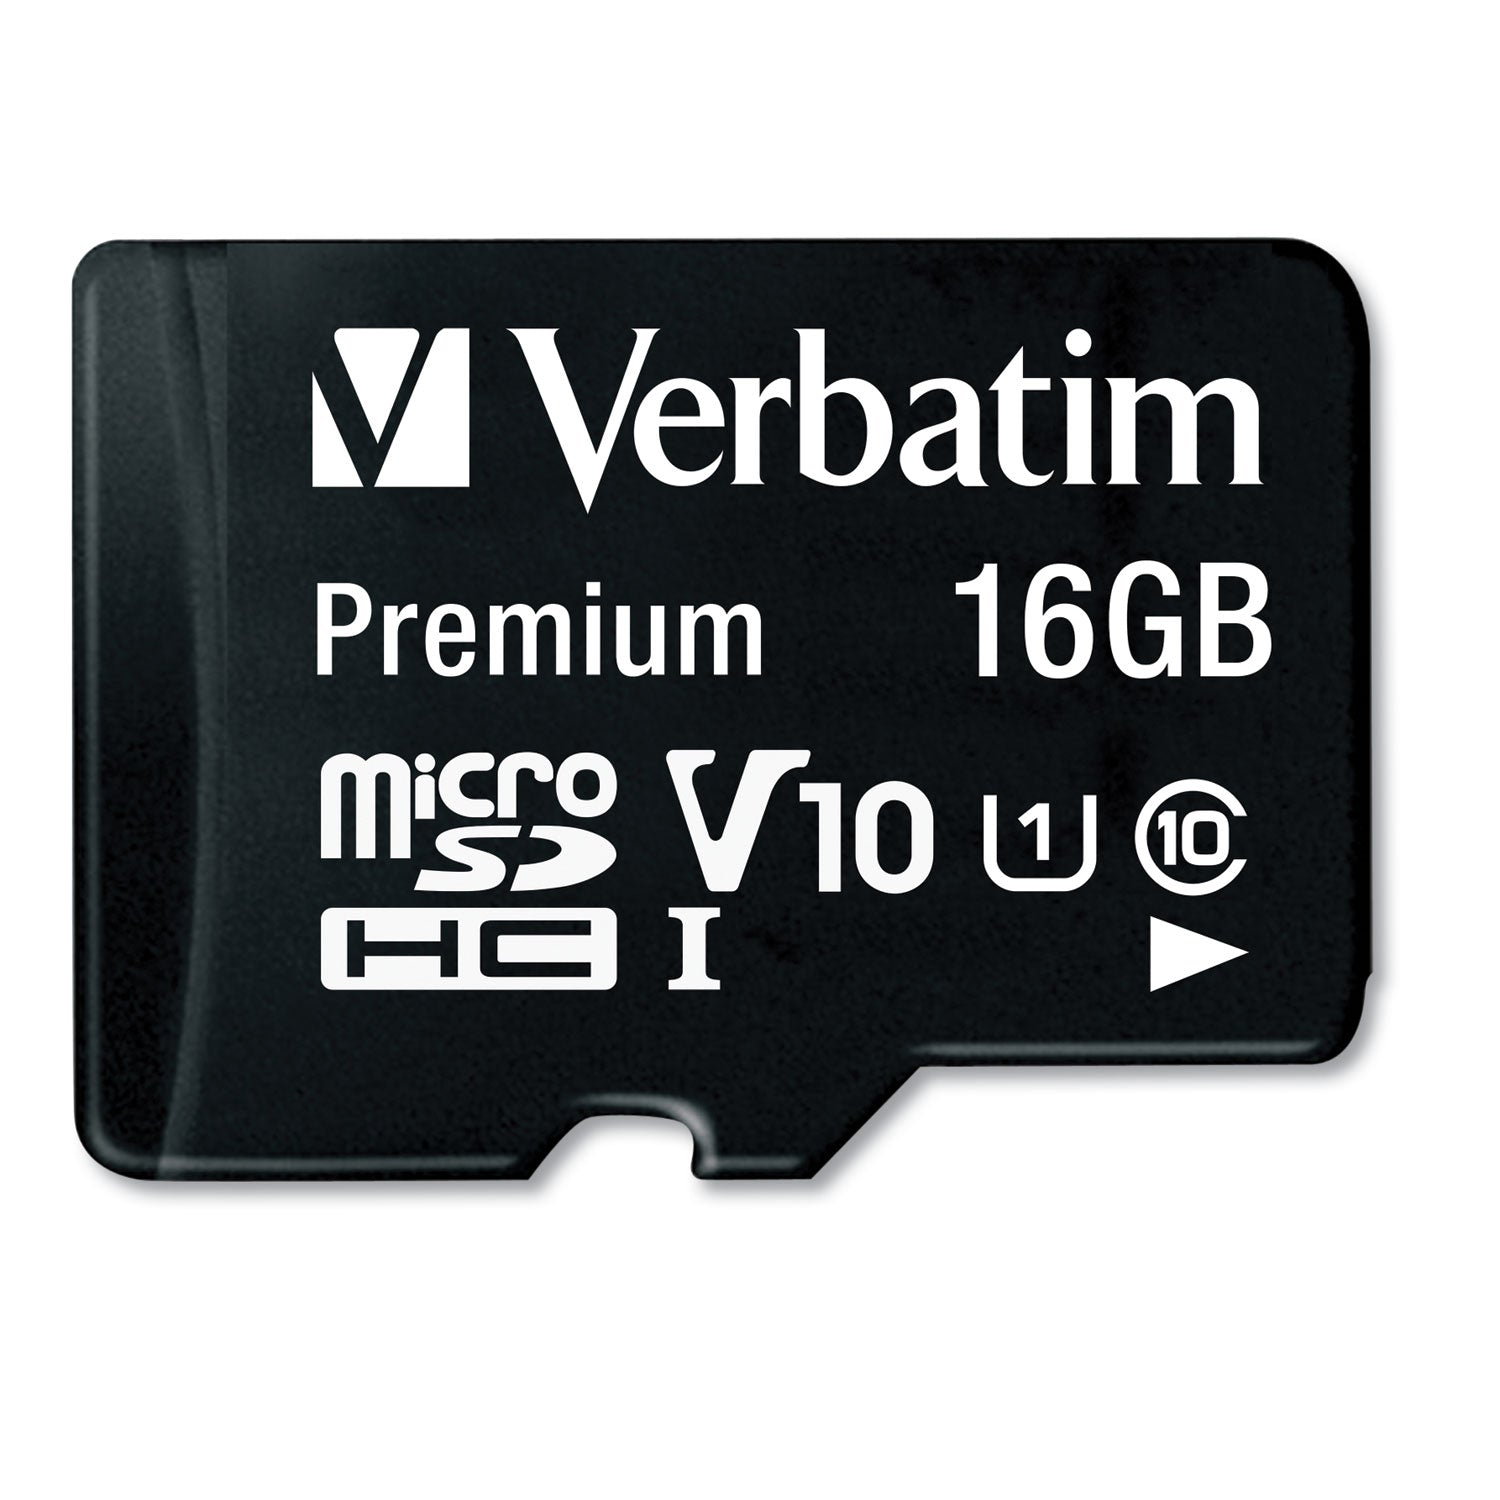 16GB Premium microSDHC Memory Card with Adapter, UHS-I V10 U1 Class 10, Up to 80MB/s Read Speed - 